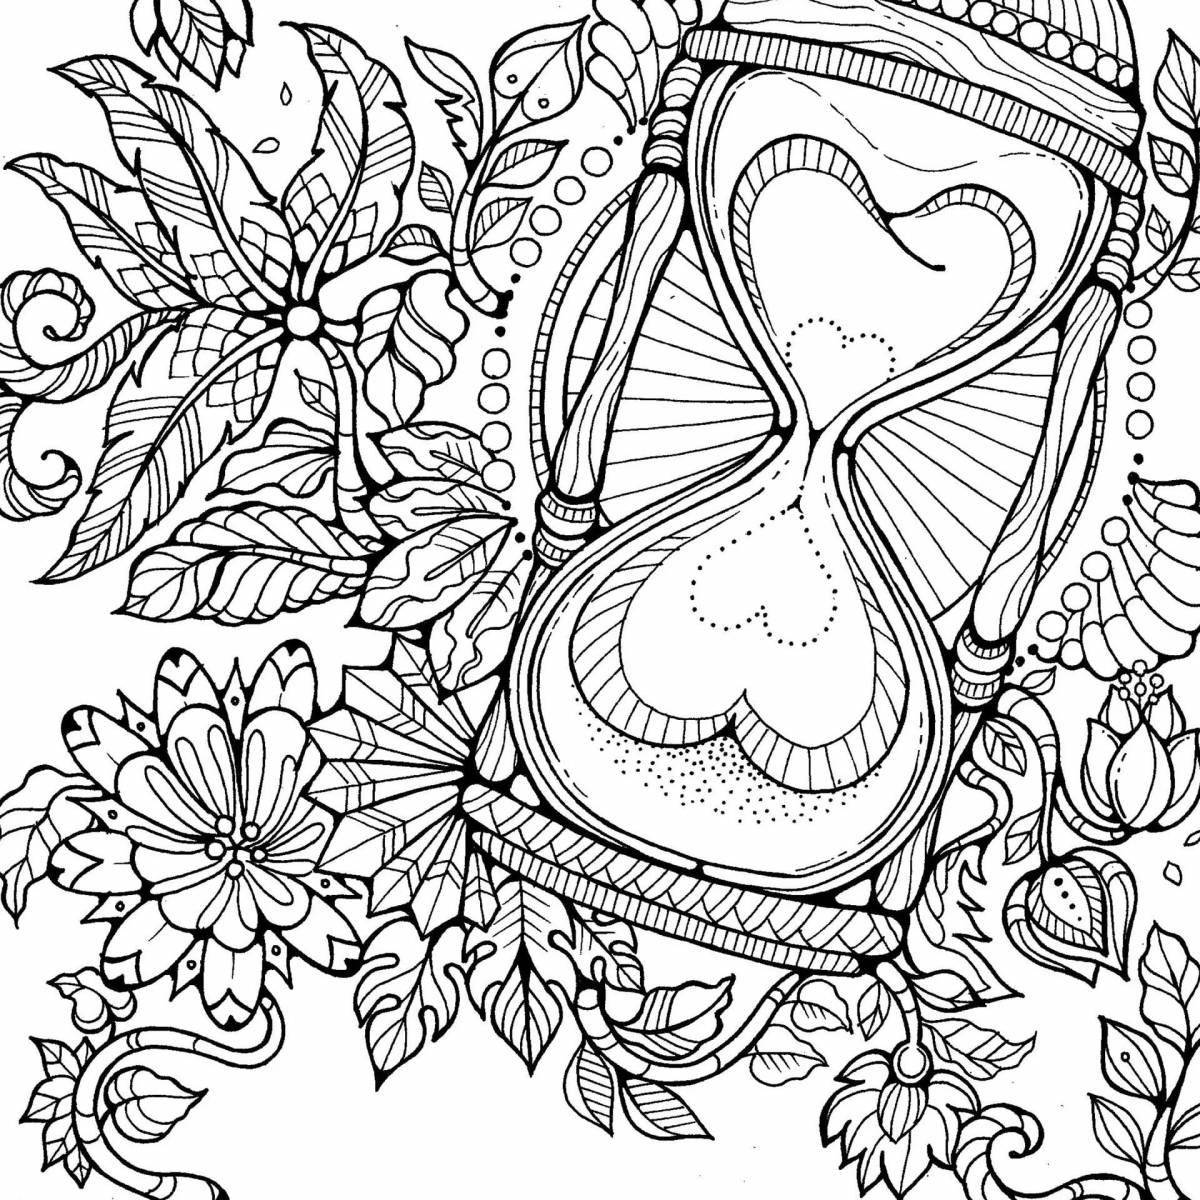 Adorable adult coloring book, large